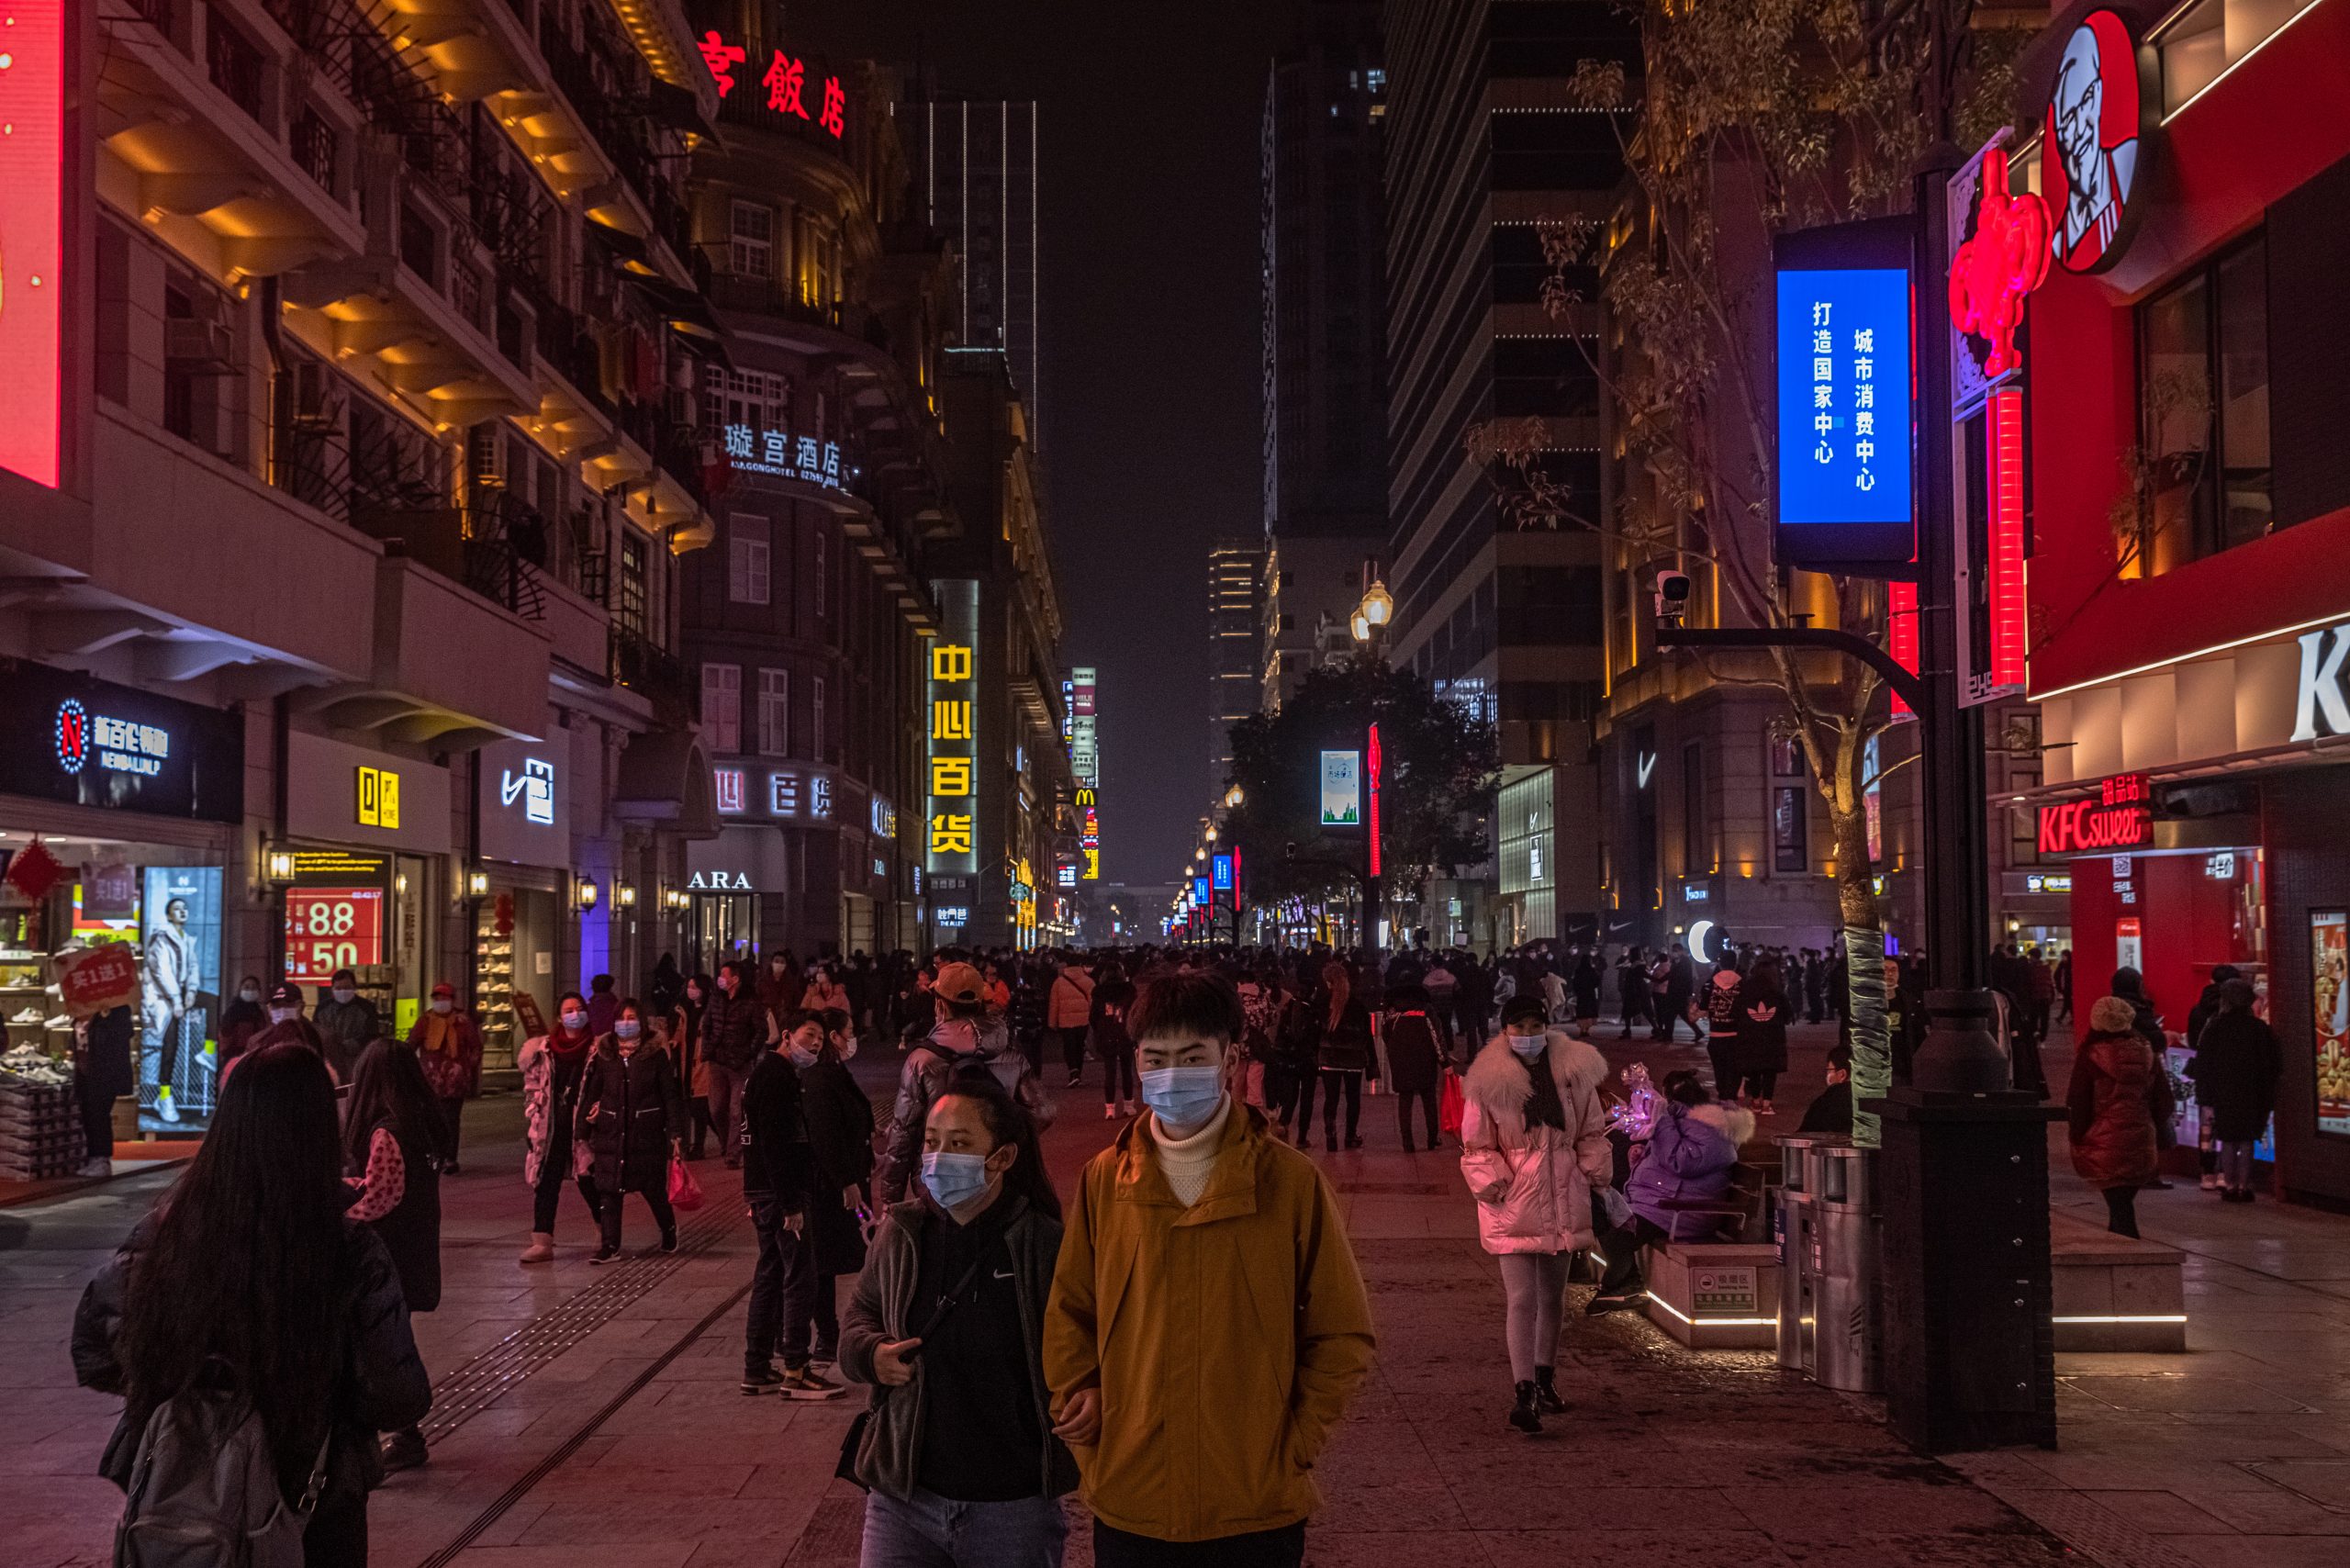 epa08957872 People wearing protective face masks walk in a commercial street, in Wuhan, China, 22 January 2021. The 23 January 2021 marks the one-year anniversary of the start of a strict 76-day lockdown of the Chinese city of Wuhan, where the coronavirus was first discovered before spreading across the world into a deadly global Covid-19 pandemic.  EPA/ROMAN PILIPEY